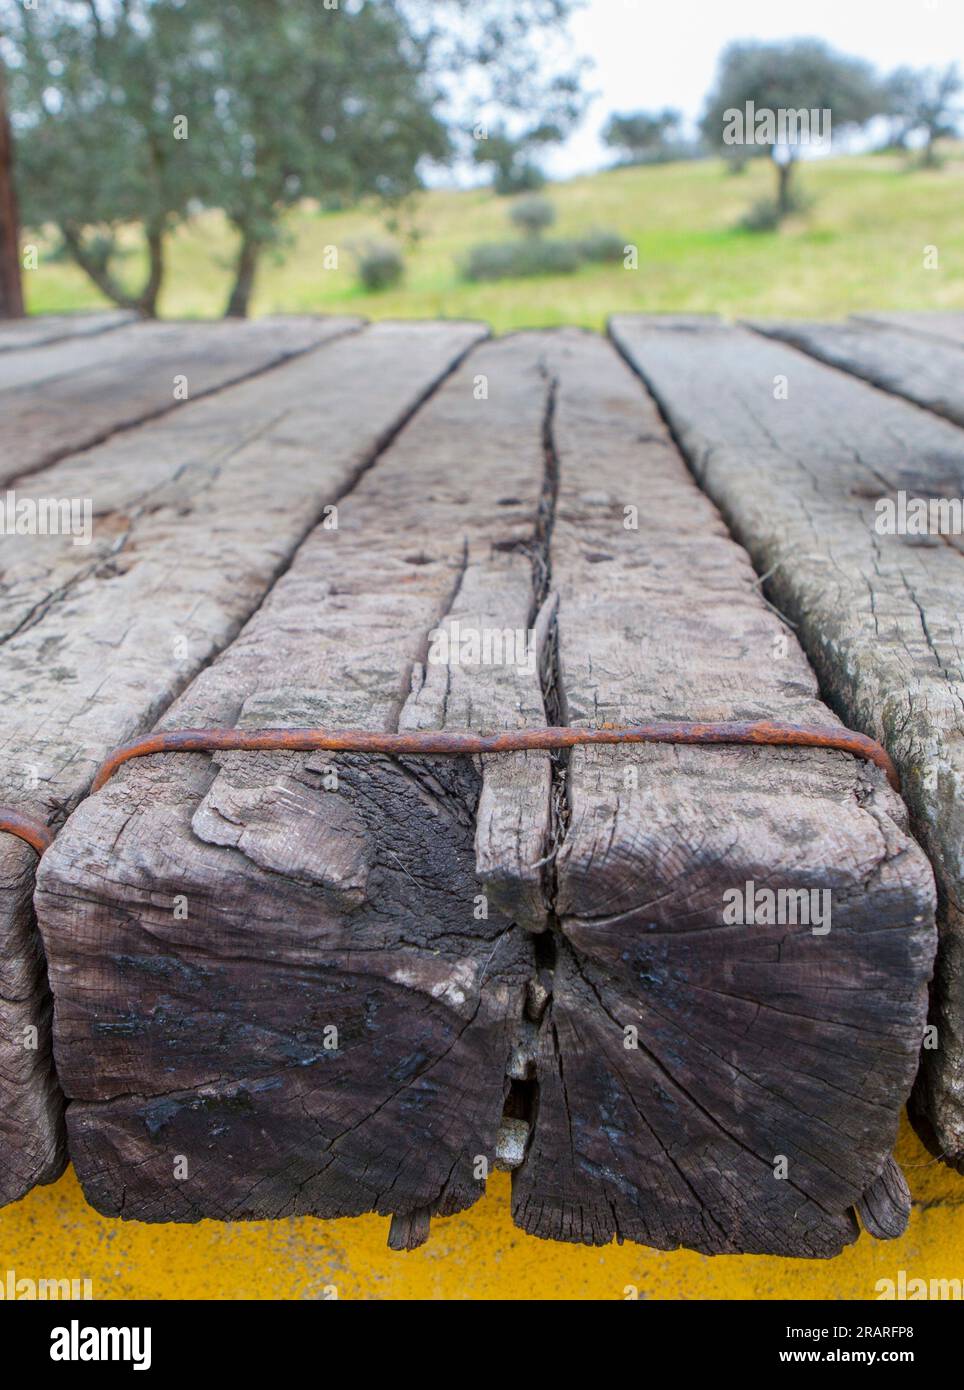 Old wooden sleepers reused for covering. Recycling construction materials concept. Stock Photo